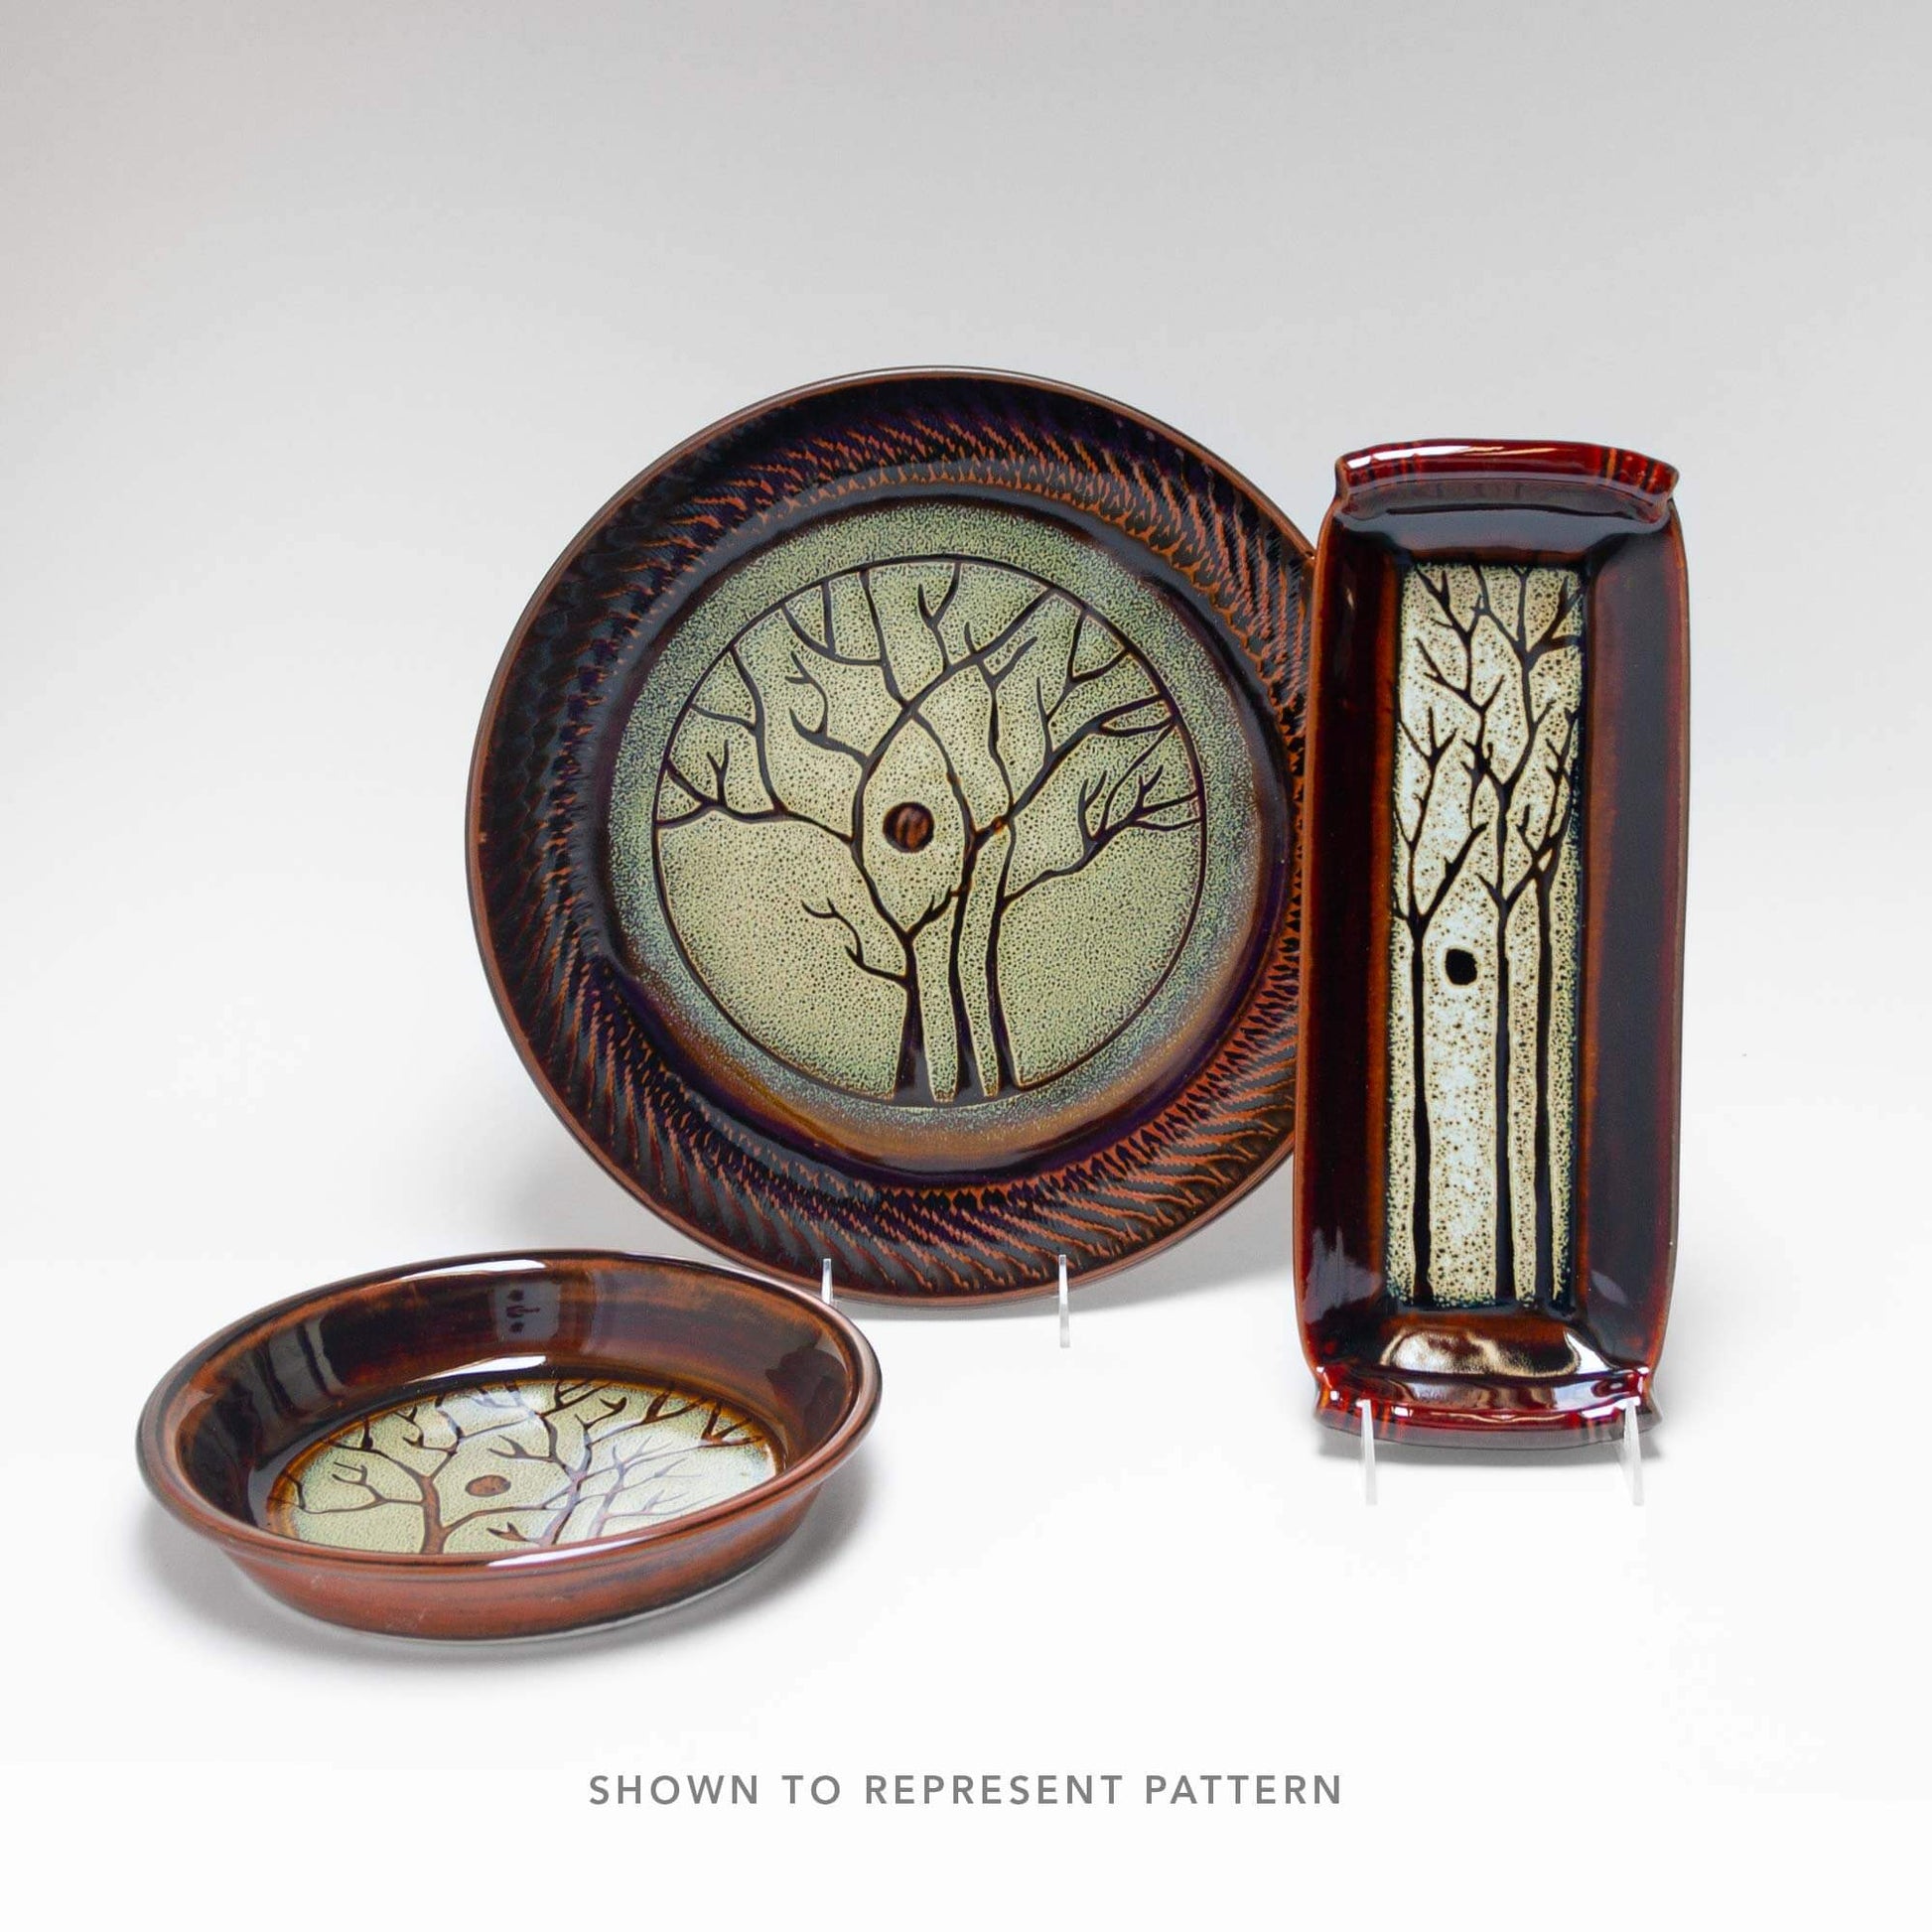 Handmade Pottery Trivet in Hamada Tree pattern made by Georgetown Pottery in Maine